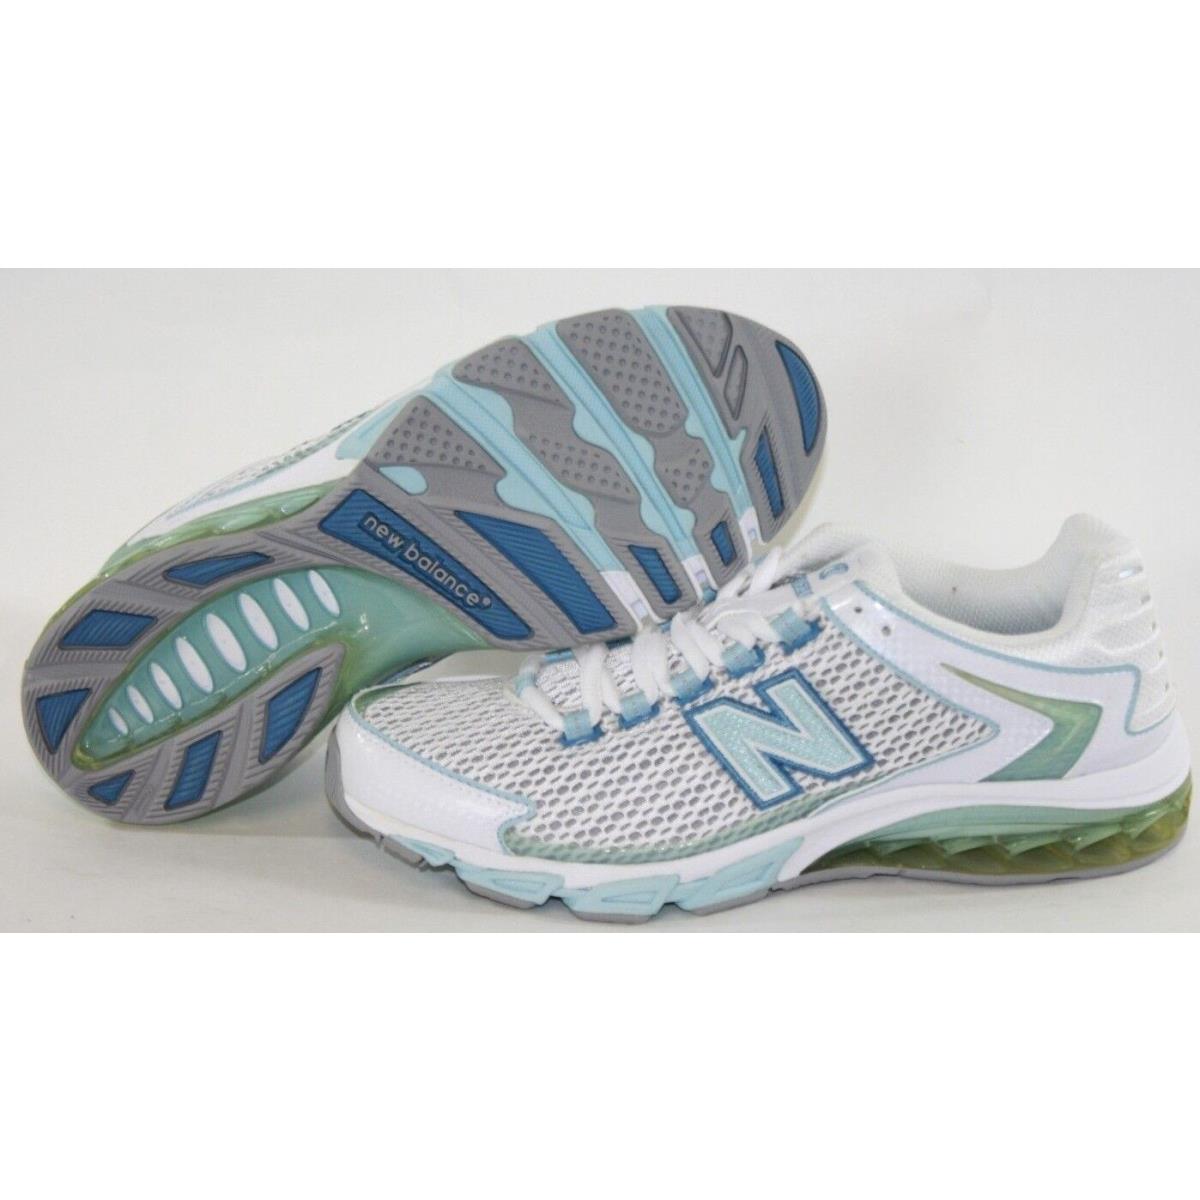 New Womens Size 7 New Balance 8510 WB White Light Blue Running Sneakers Shoes